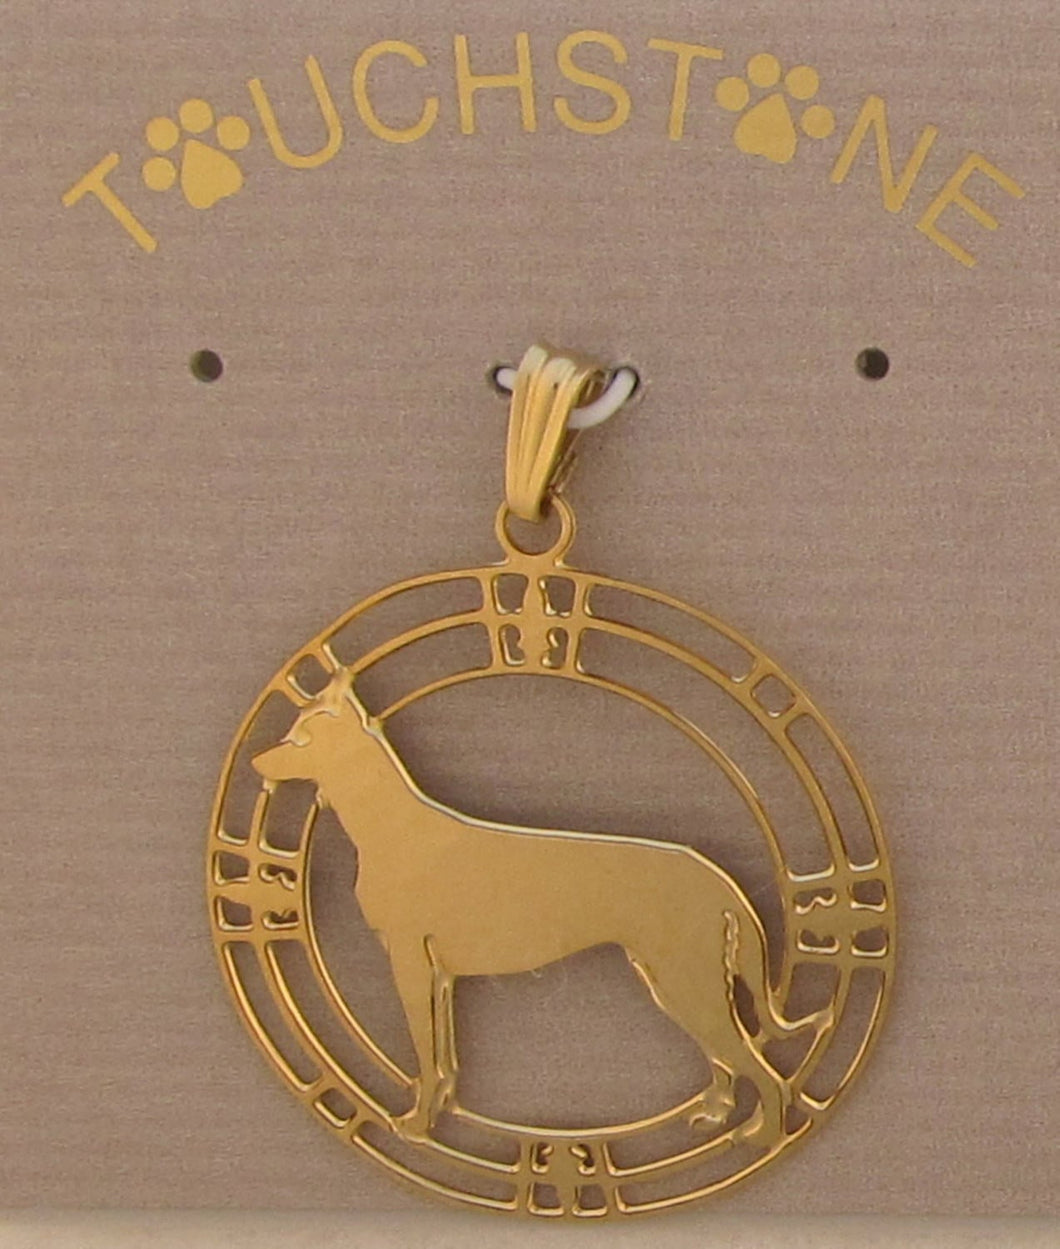 Beauceron Pendant by Touchstone Dog Designs // Beauceron Jewelry  // Dog Breed Jewelry // AKC Breed Jewelry